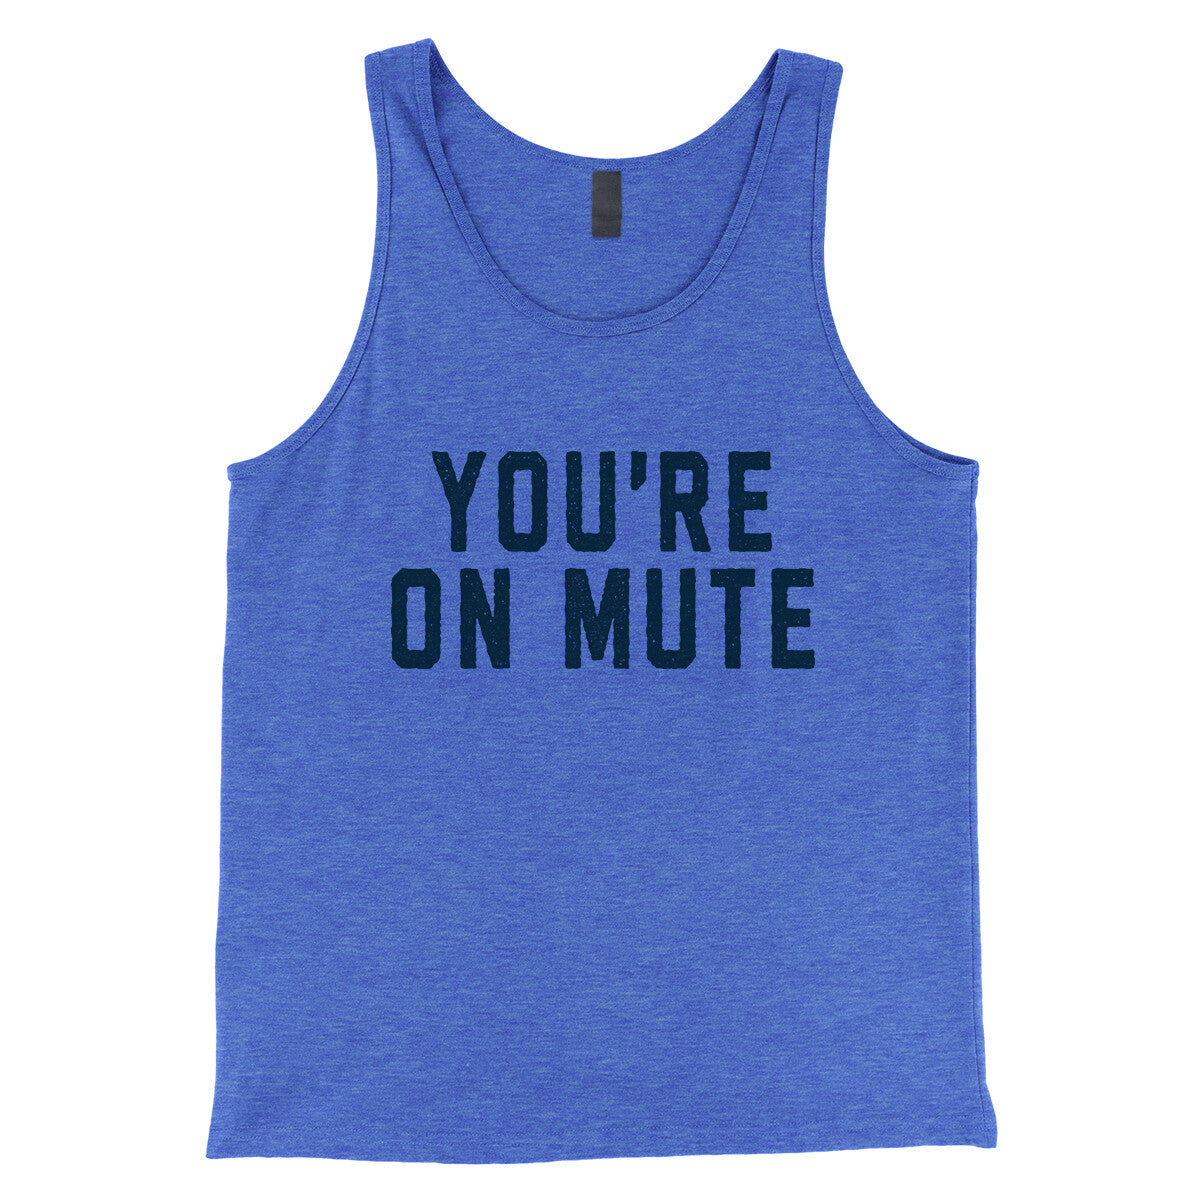 You're on Mute in True Royal TriBlend Color